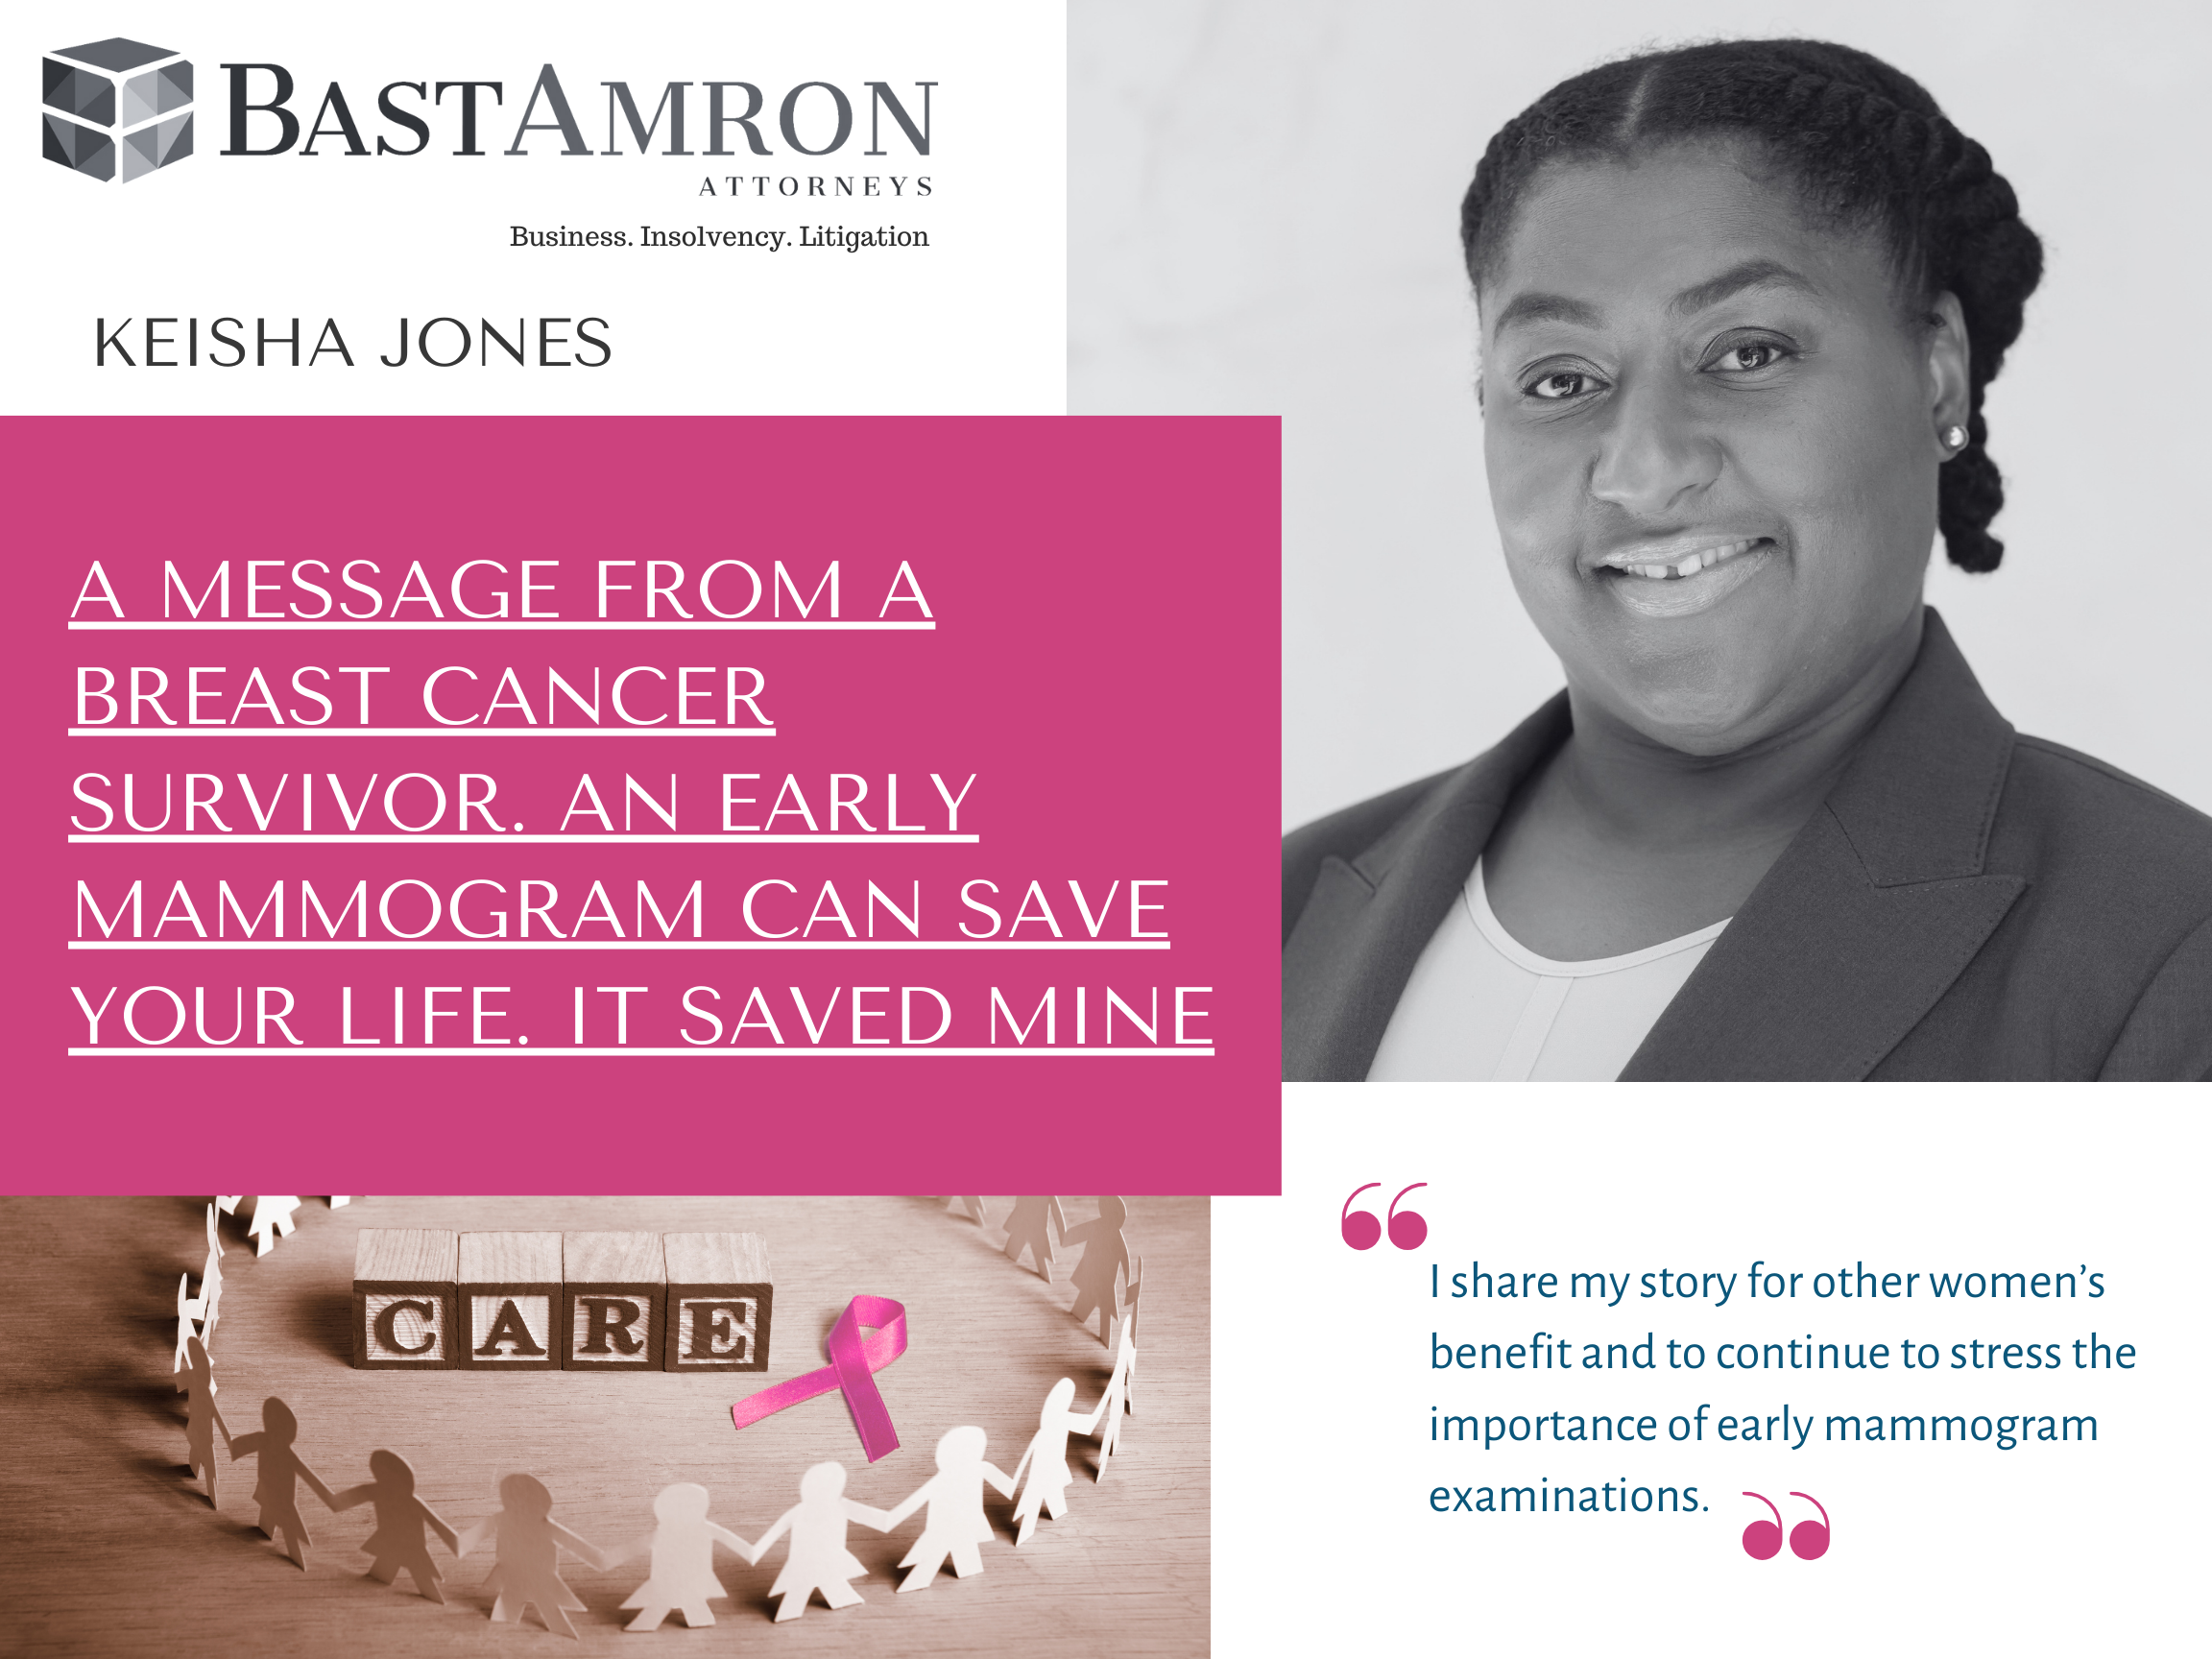 A MESSAGE FROM A BREAST CANCER SURVIVOR. AN EARLY MAMMOGRAM CAN SAVE YOUR LIFE. IT SAVED MINE